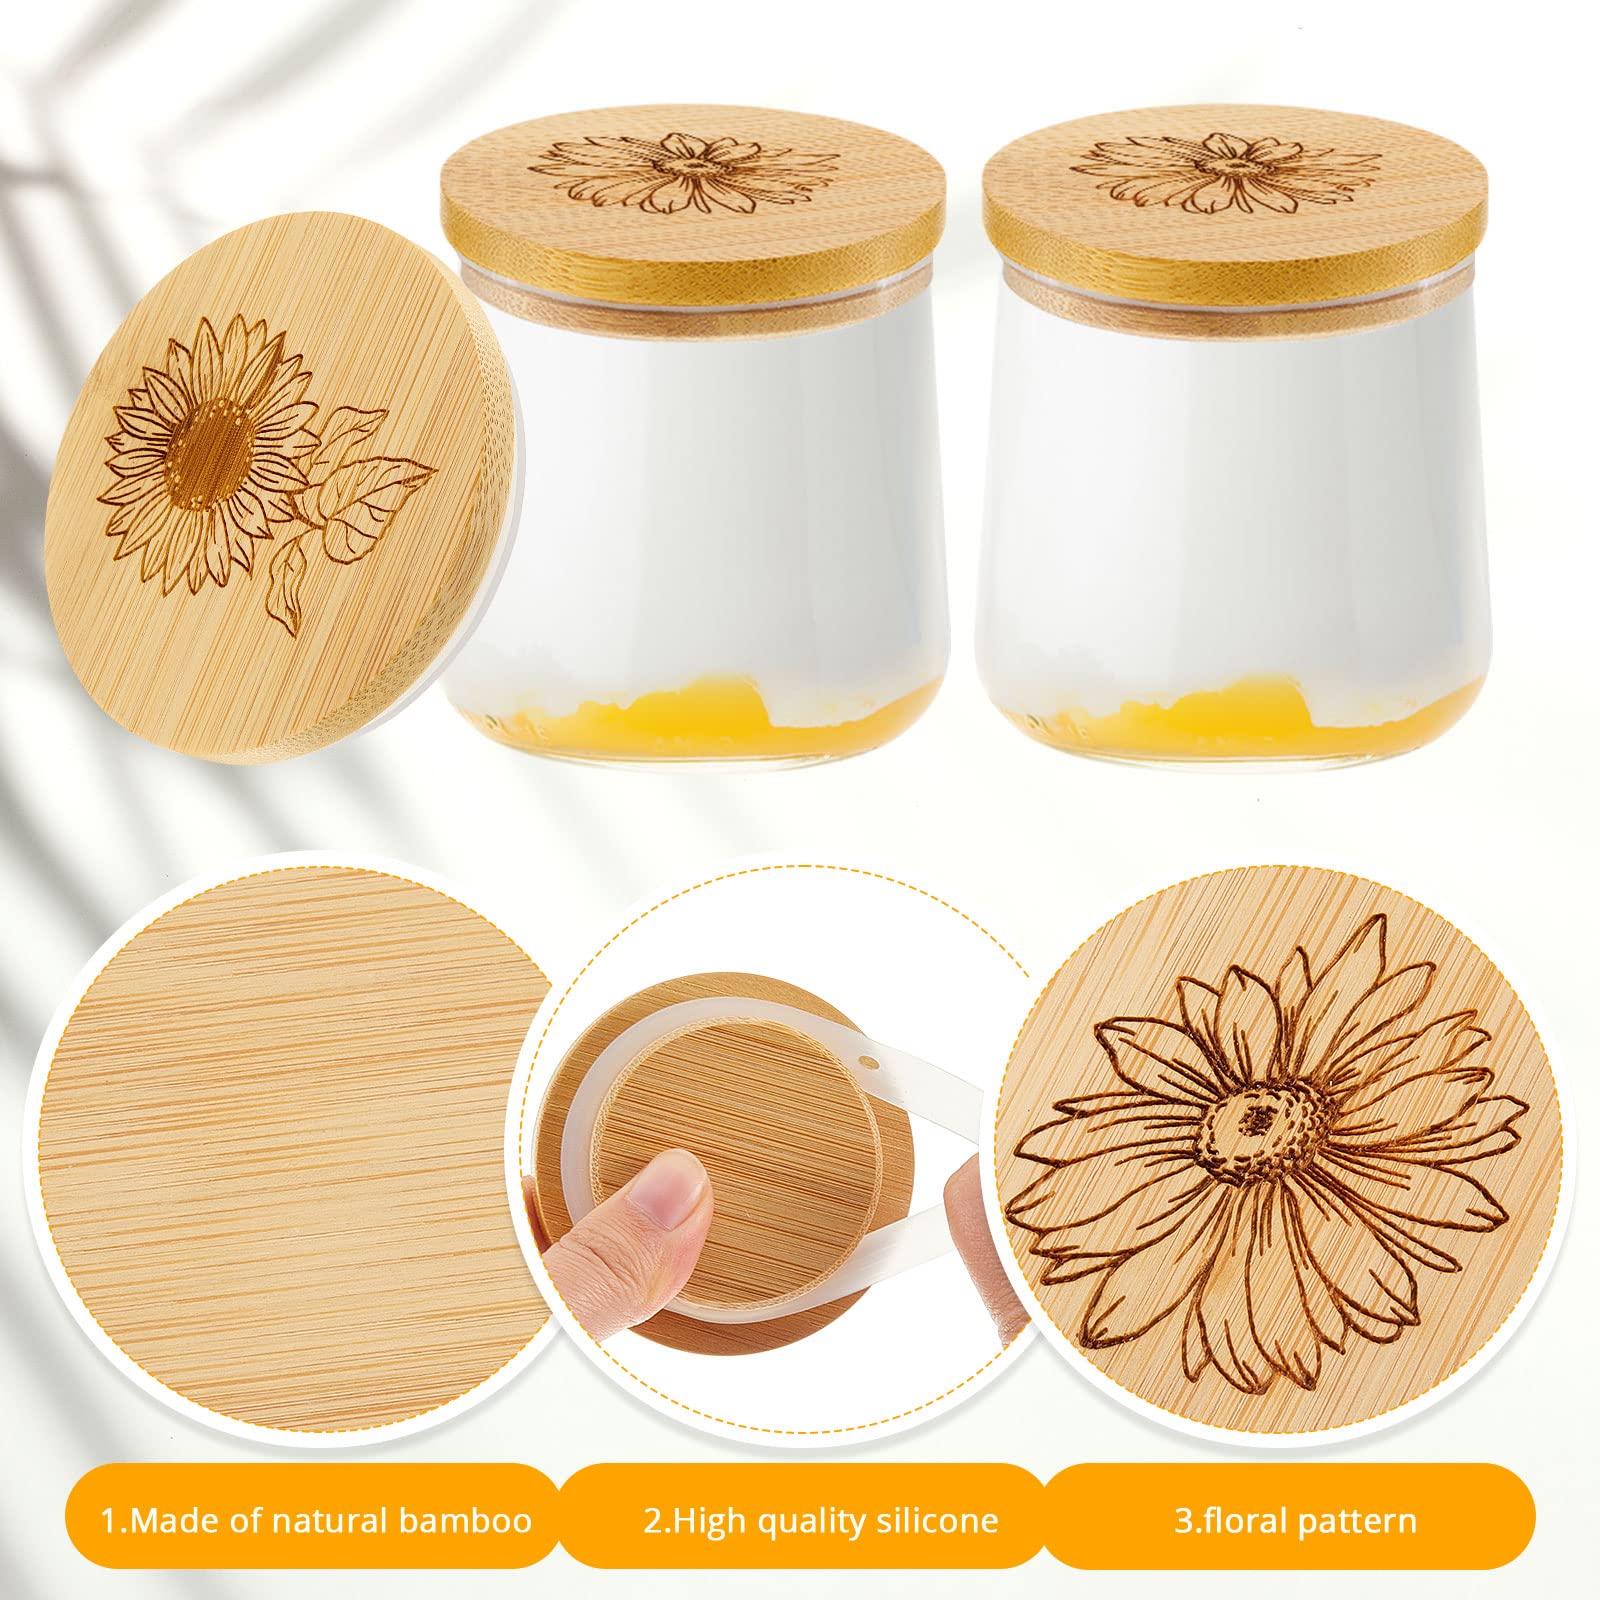 Yogurt Jar Lids Round Reusable Bamboo Jar Lids Creative Wooden Lids Decorative Bamboo Lids with Silicone Sealing Rings Compatible with Oui Yogurt Jars for Coffee Cookie Supplies (18 Pieces)